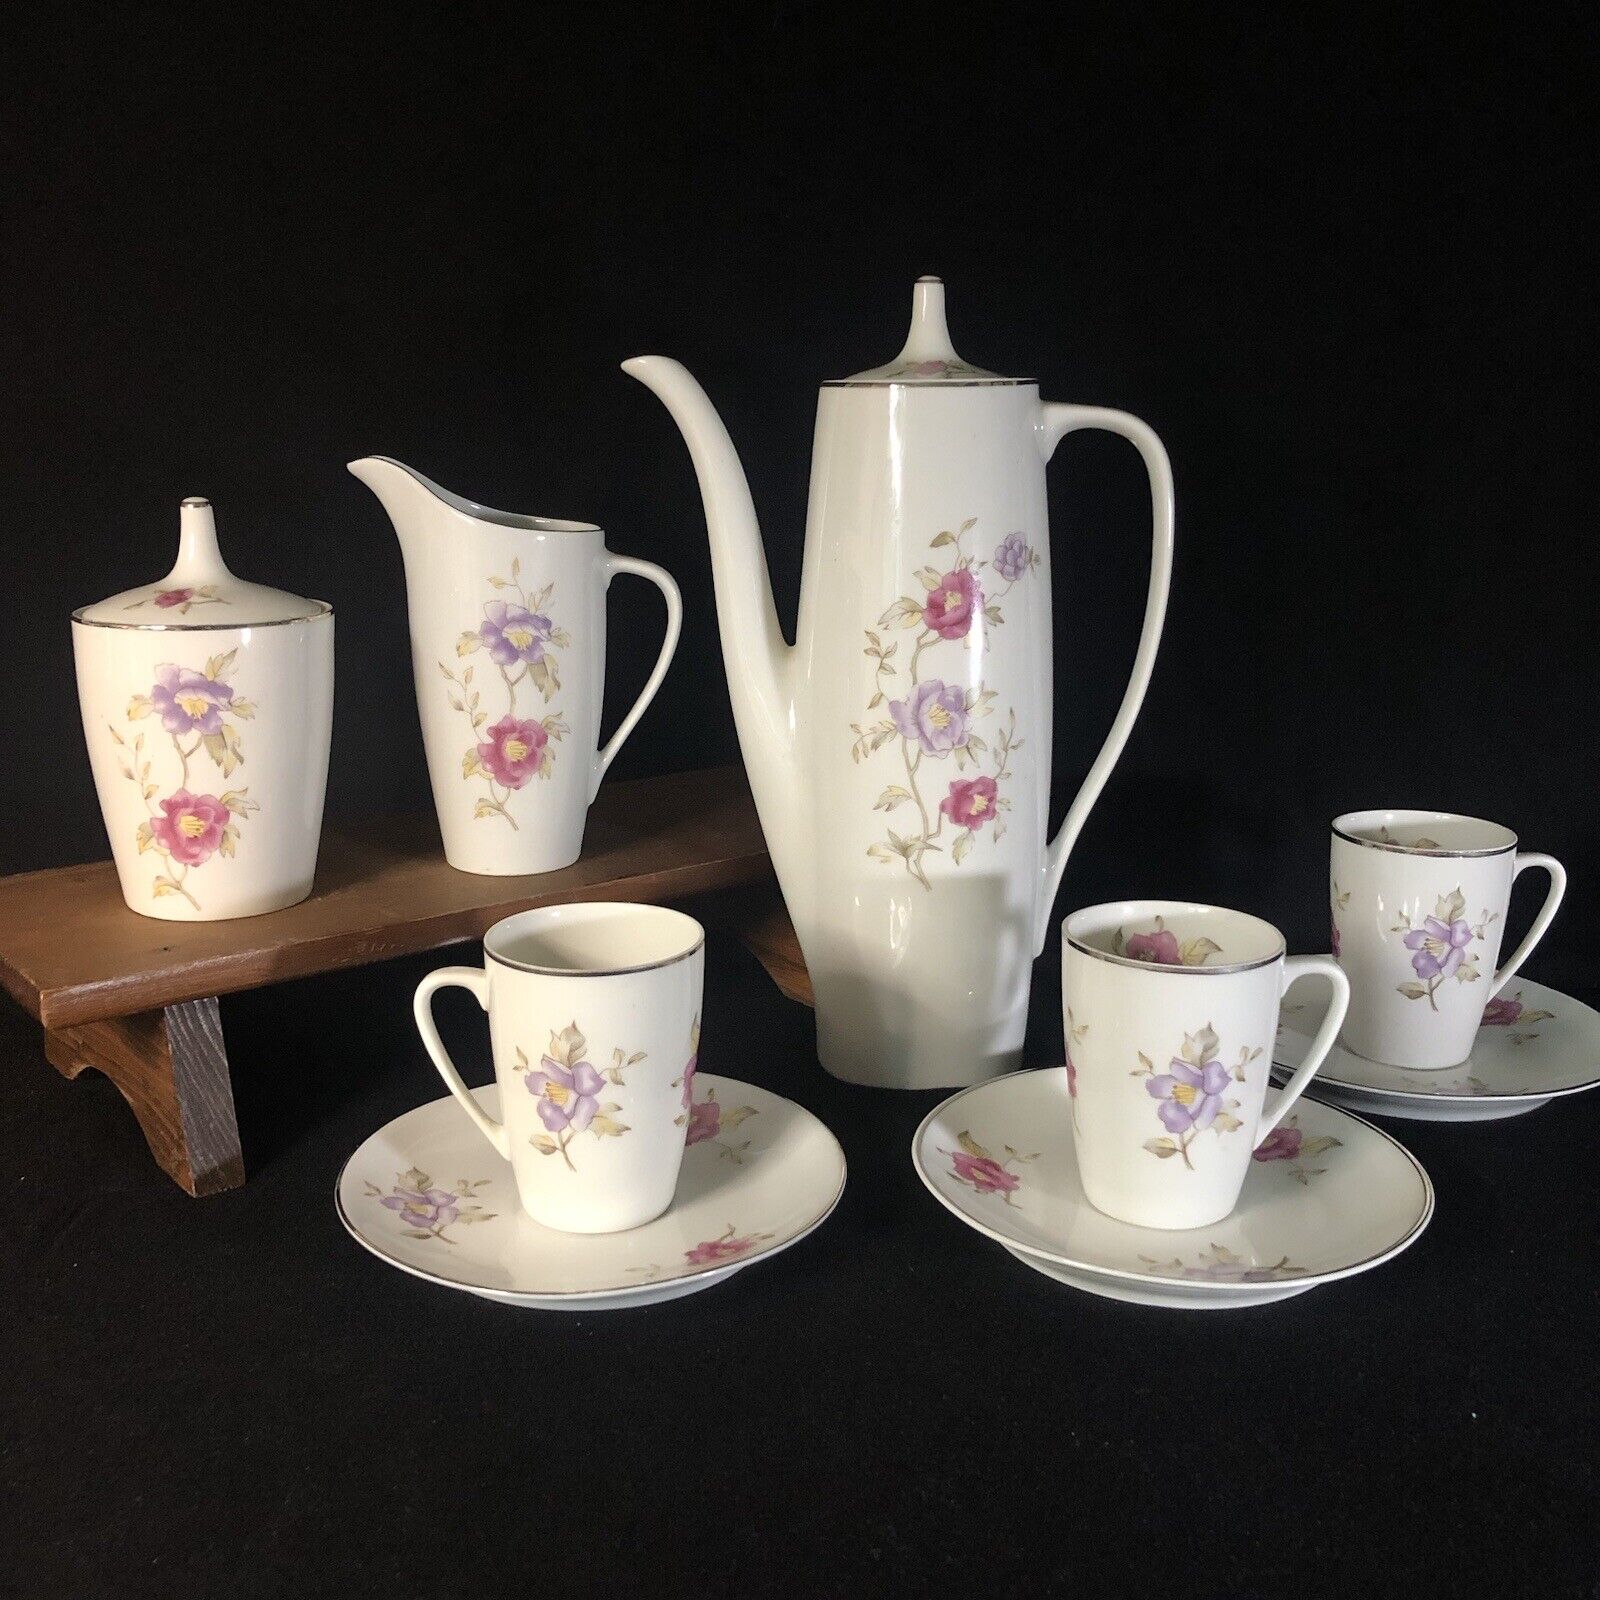 Vintage Cmielow 9 Pc Coffee Set Pattern Louise (smooth) Made In Poland